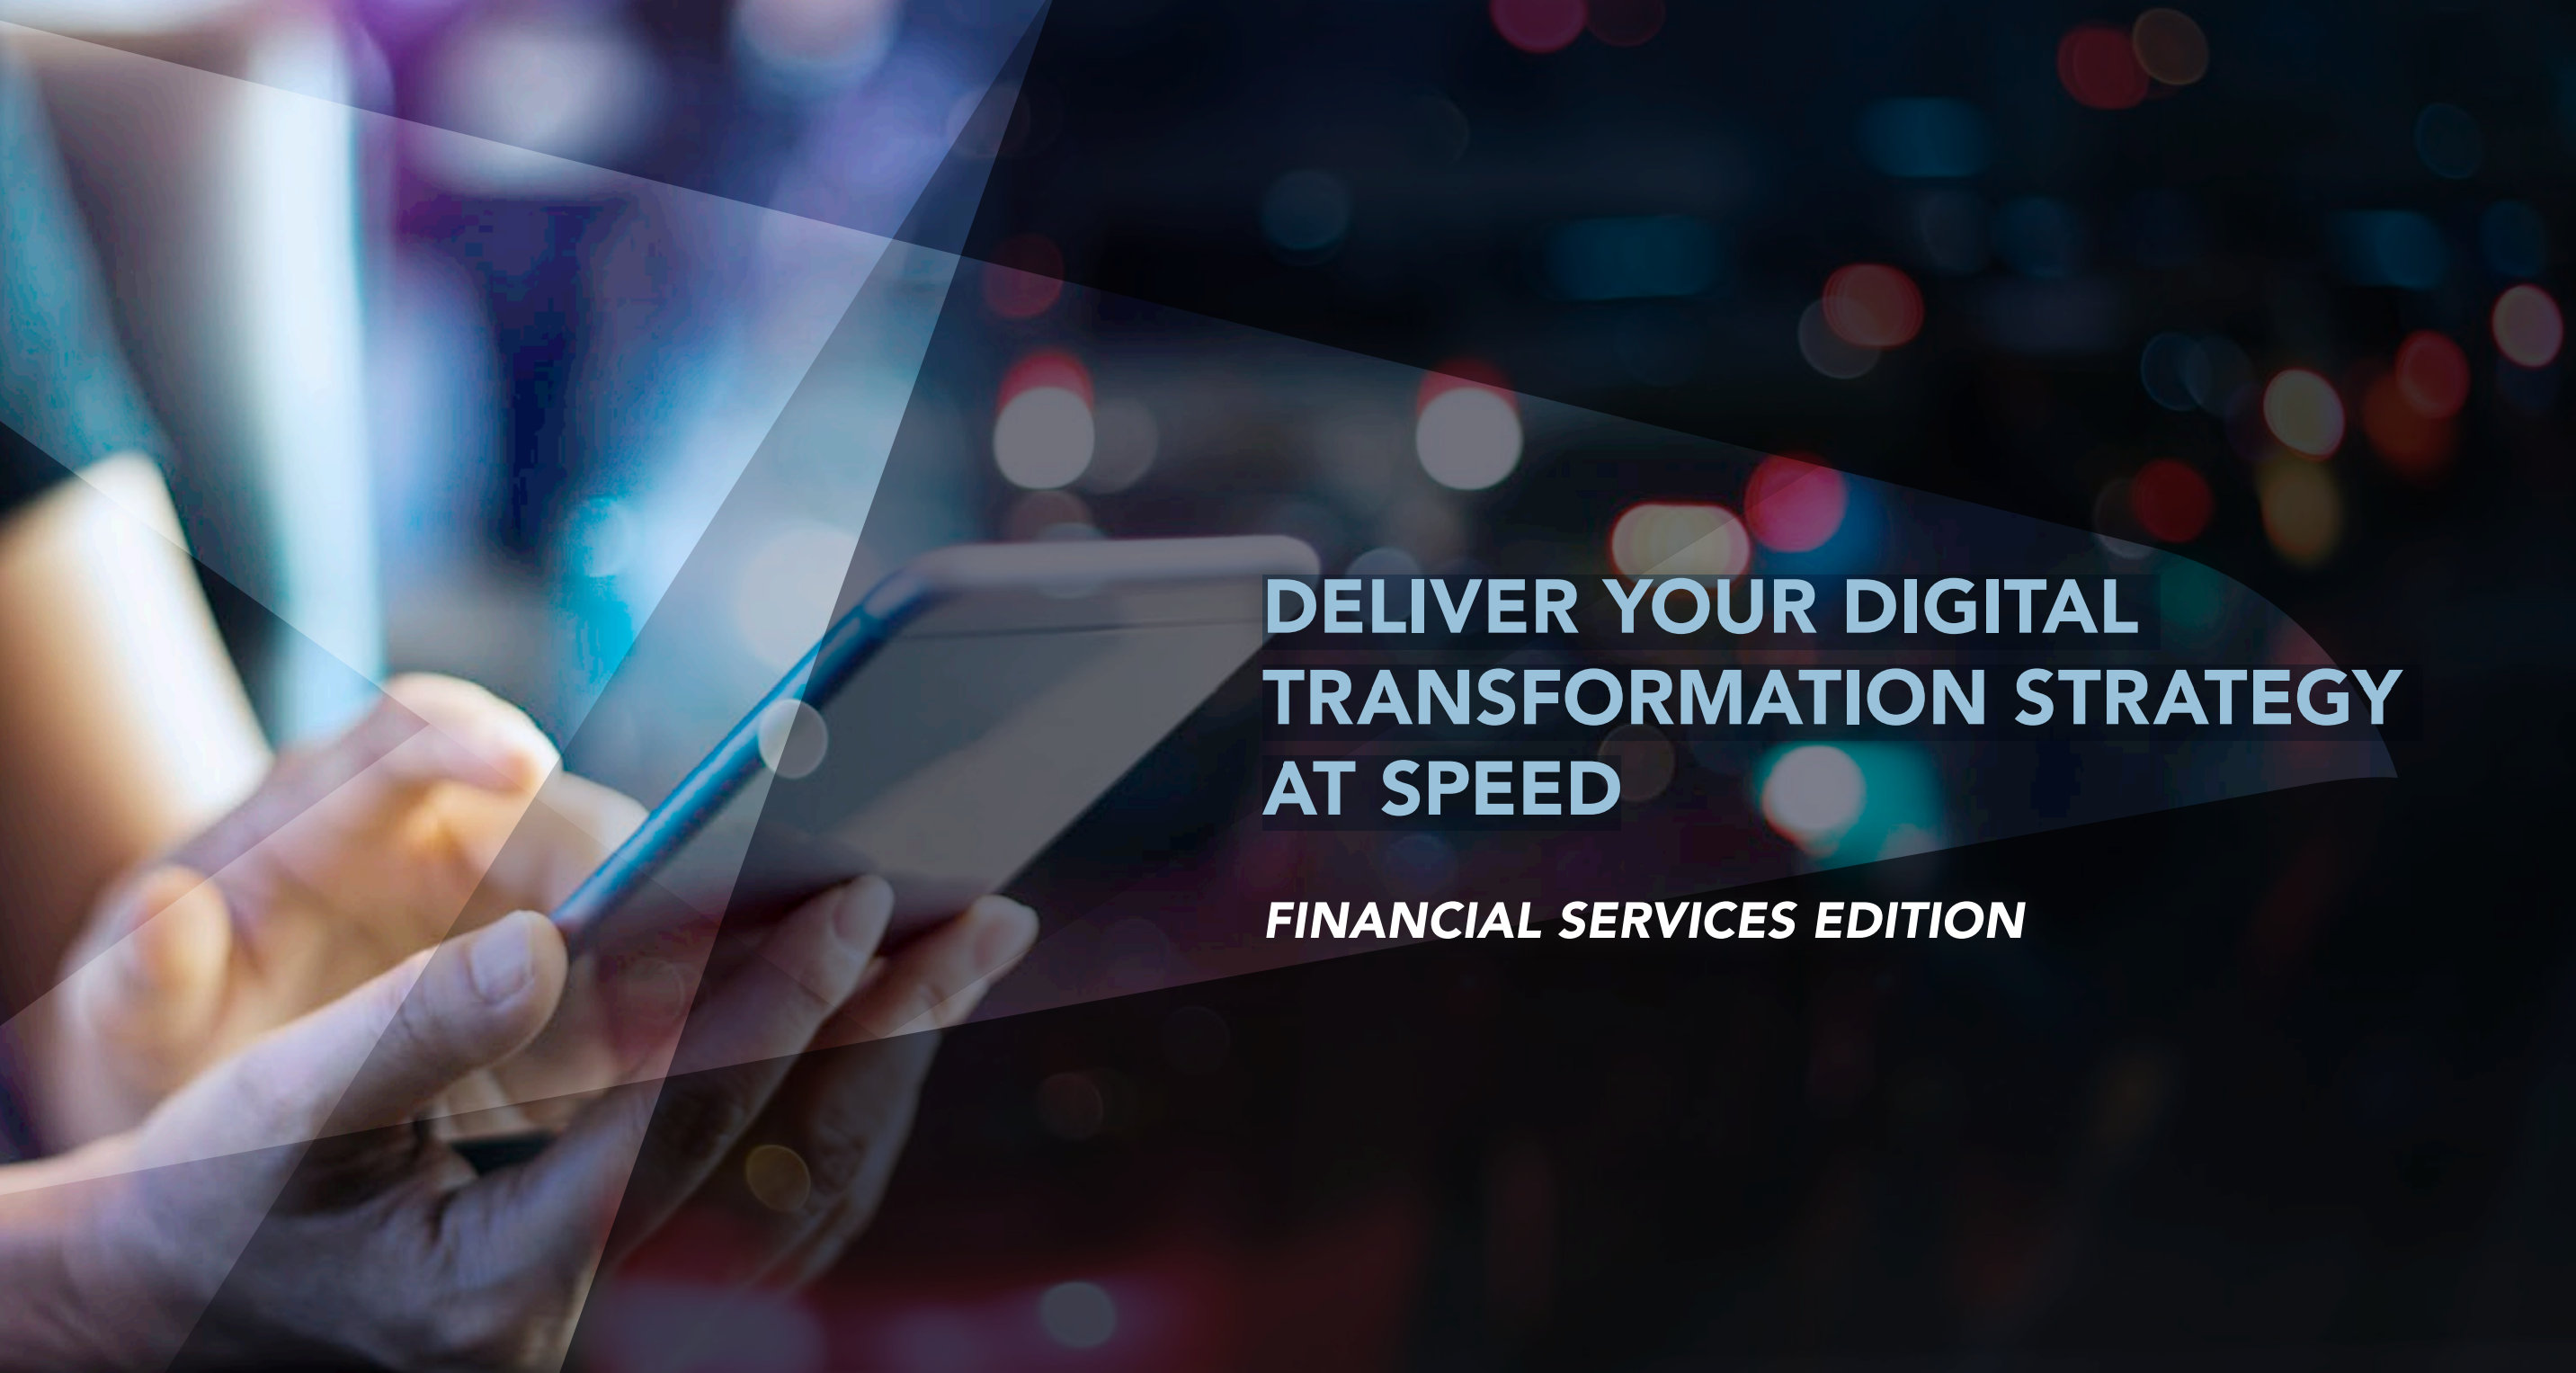 DELIVER YOUR DIGITAL TRANSFORMATION STRATEGY  AT SPEED: Financial Services Edition